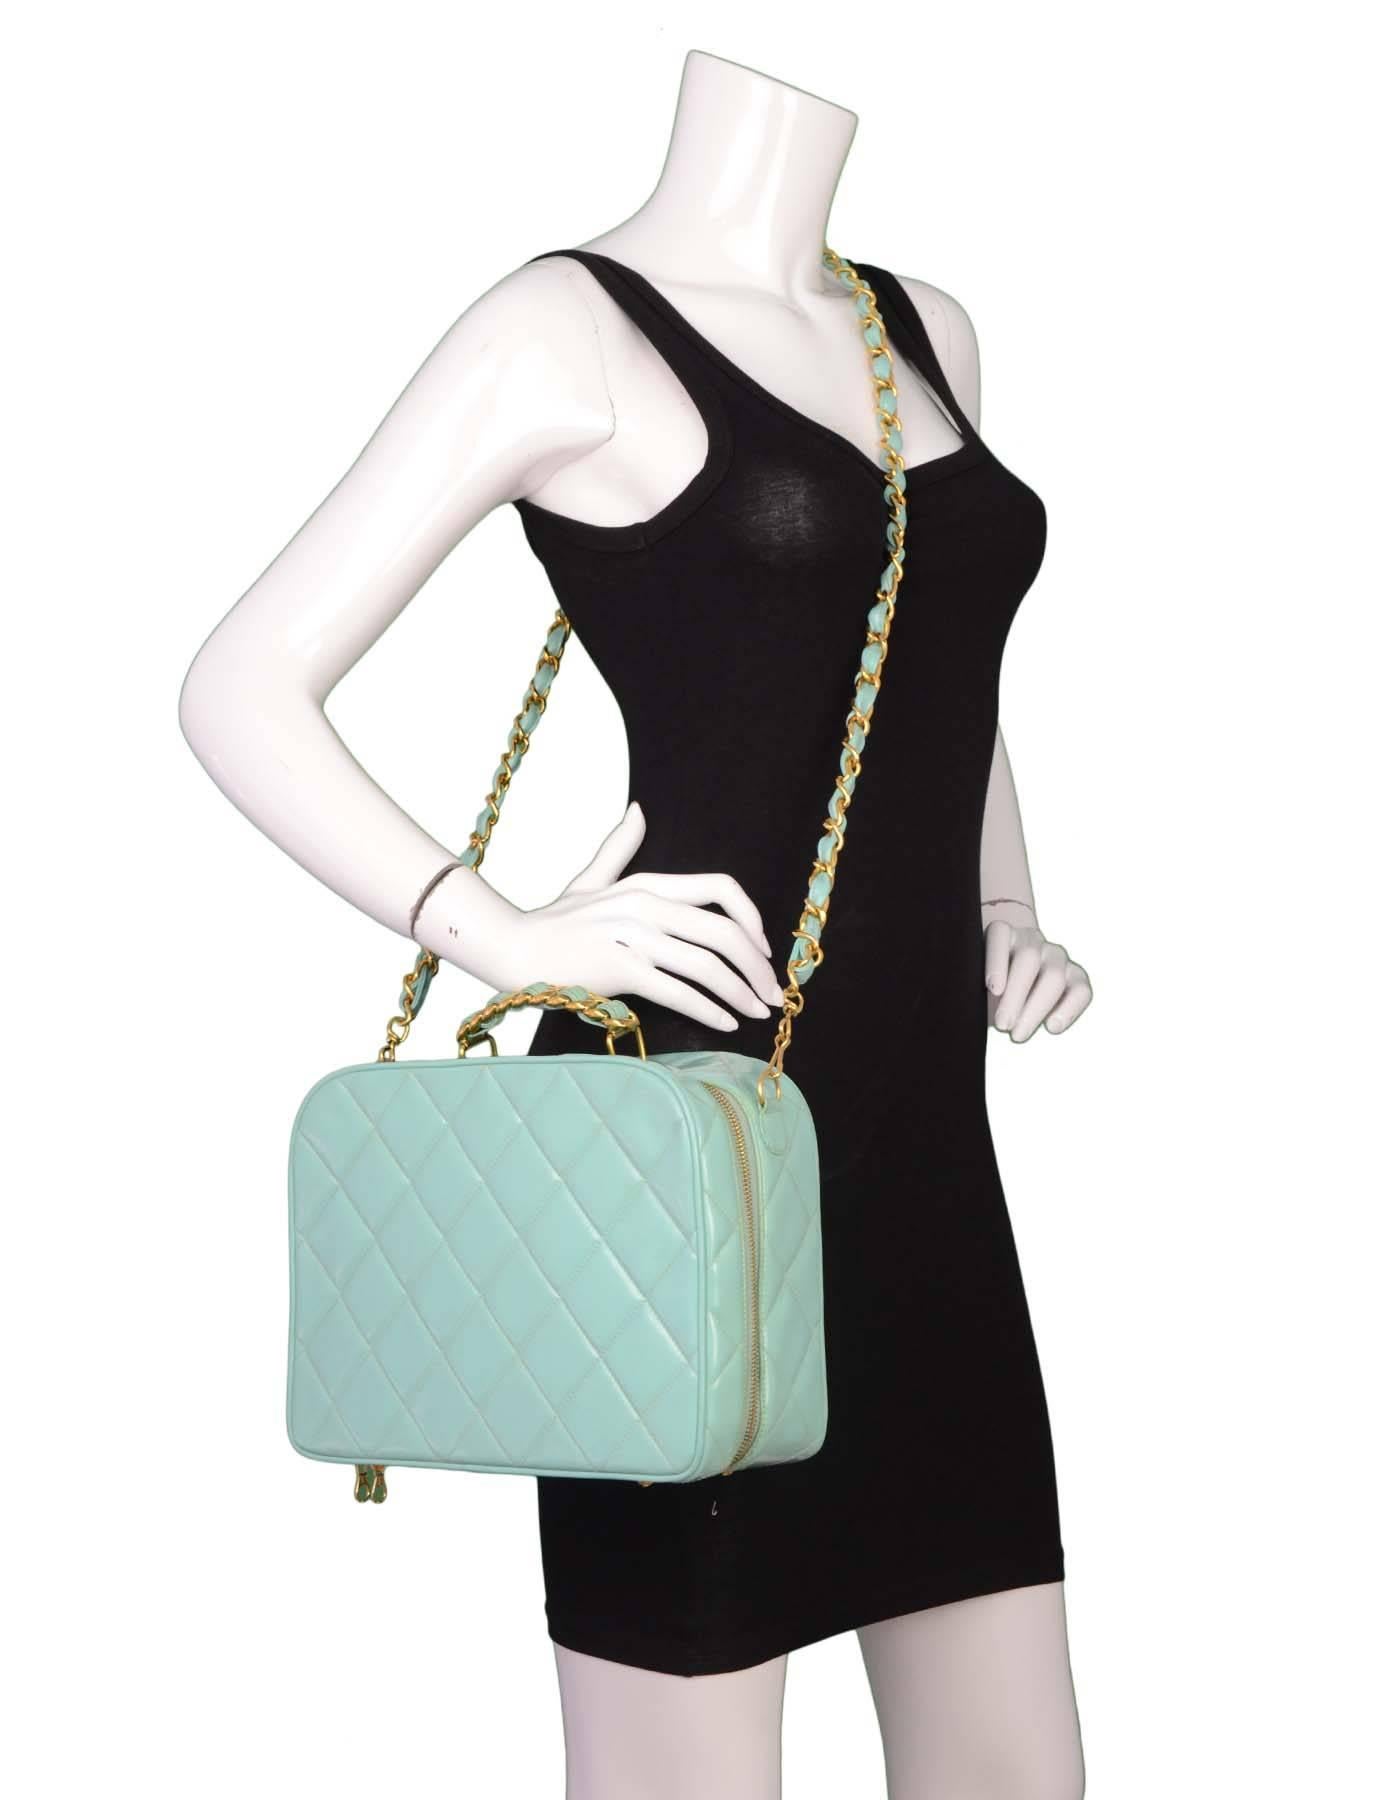 Chanel Vintage Teal Quilted Patent Vanity Crossbody Bag GHW 5